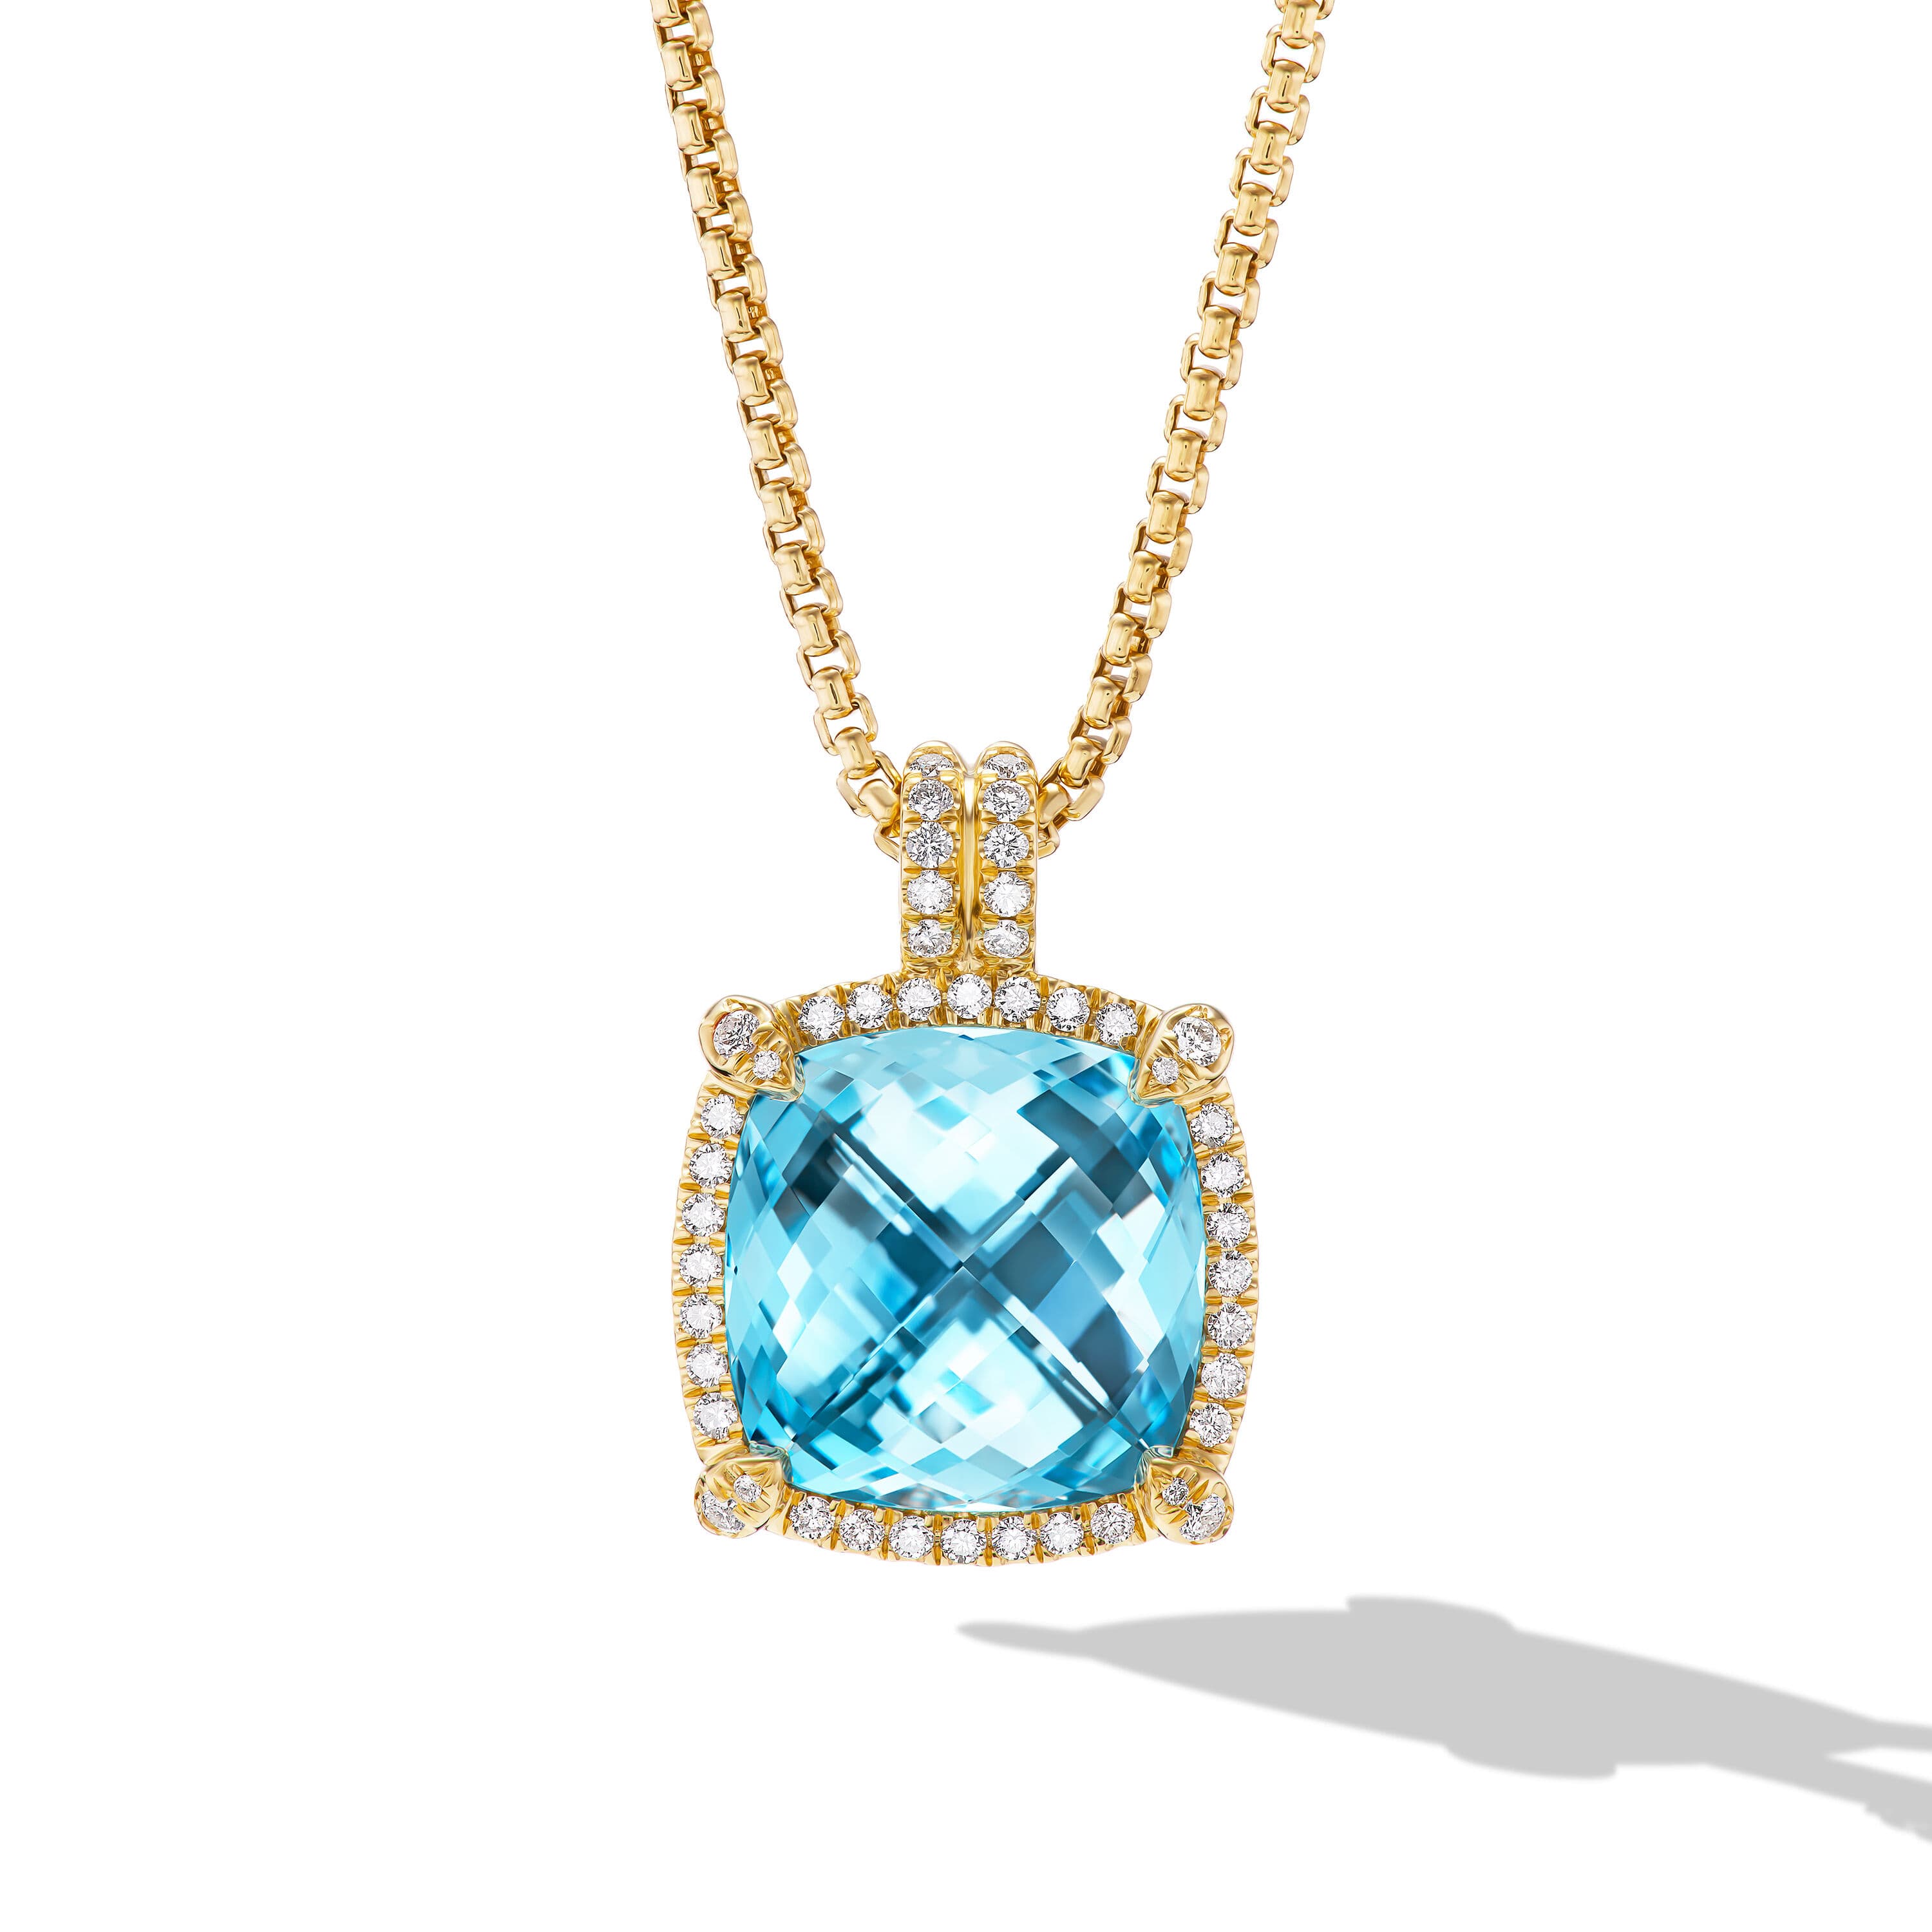 David Yurman Chatelaine Pave Bezel Pendant Necklace in 18K Yellow Gold with Blue Topaz and Diamonds 0